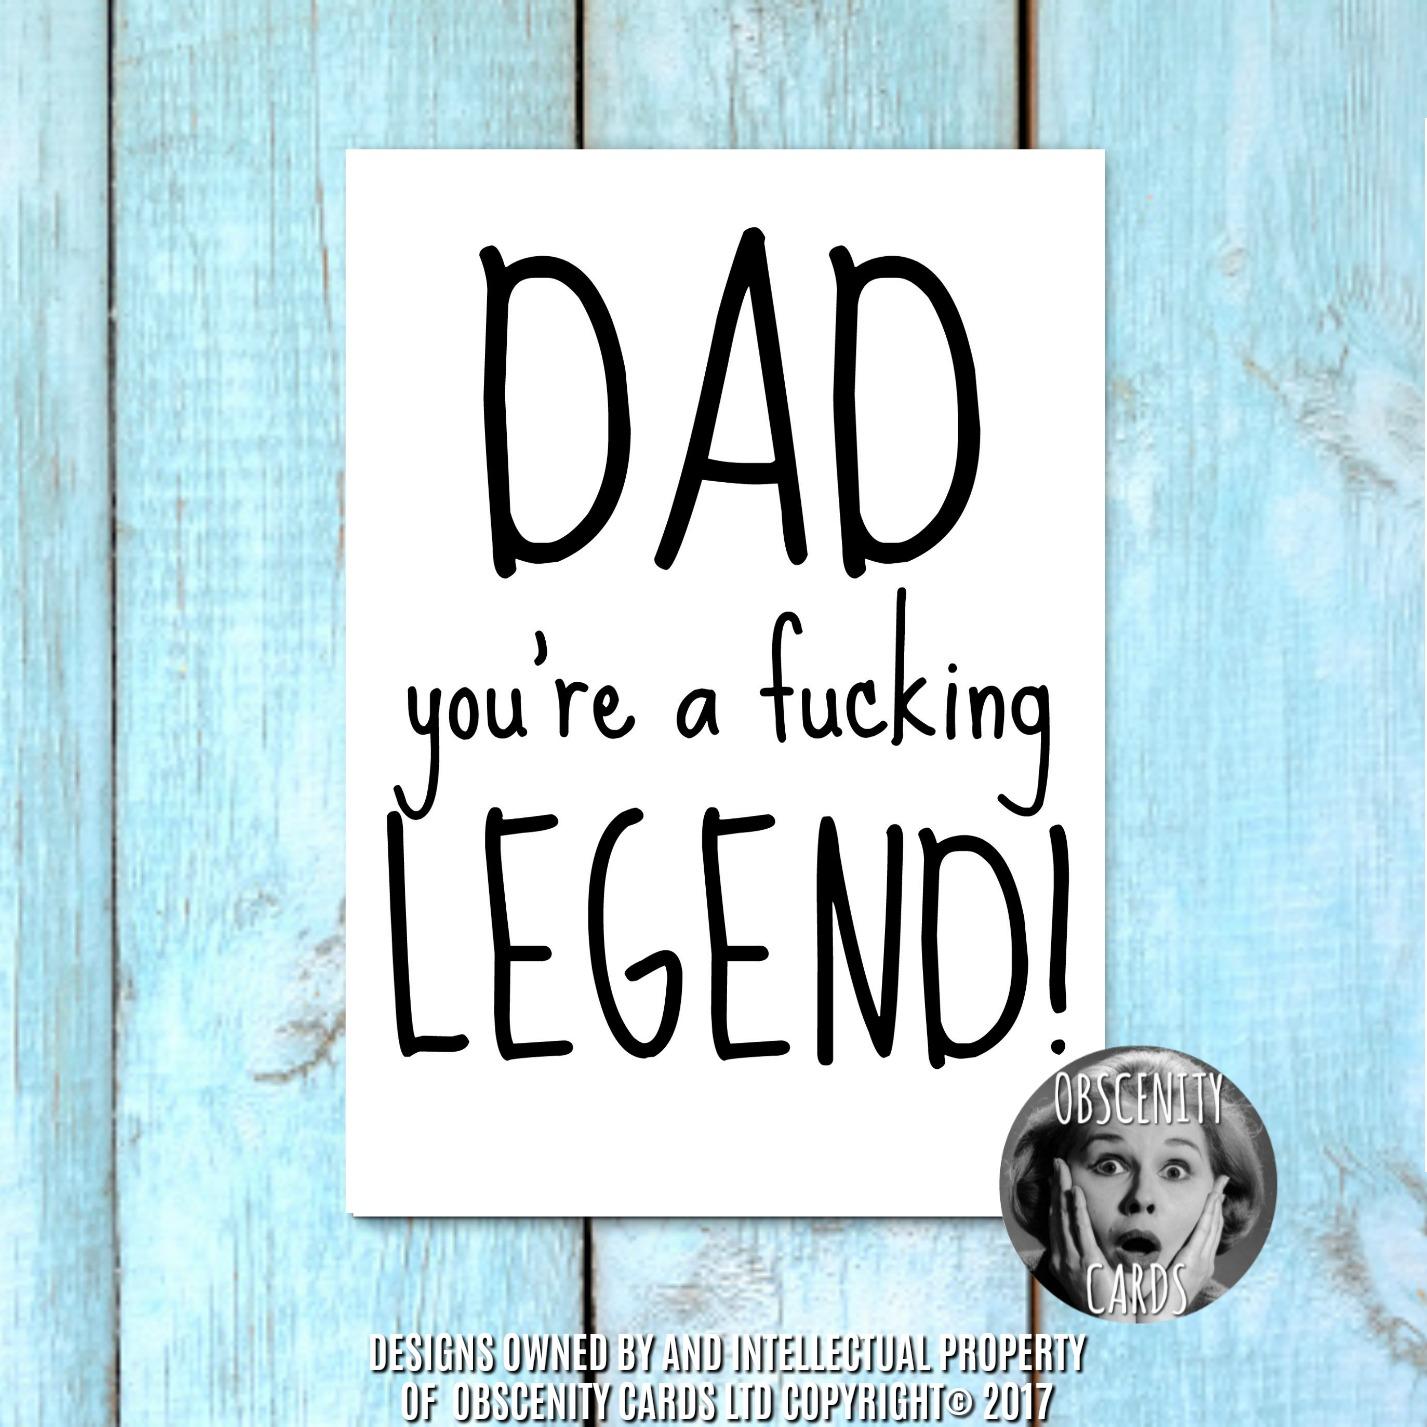 FUNNY FATHERS DAY CARDS. Obscene funny offensive birthday cards by Obscenity cards. Obscene Funny Cards, Pens, Party Hats, Key rings, Magnets, HATS Lighters & Loads More!